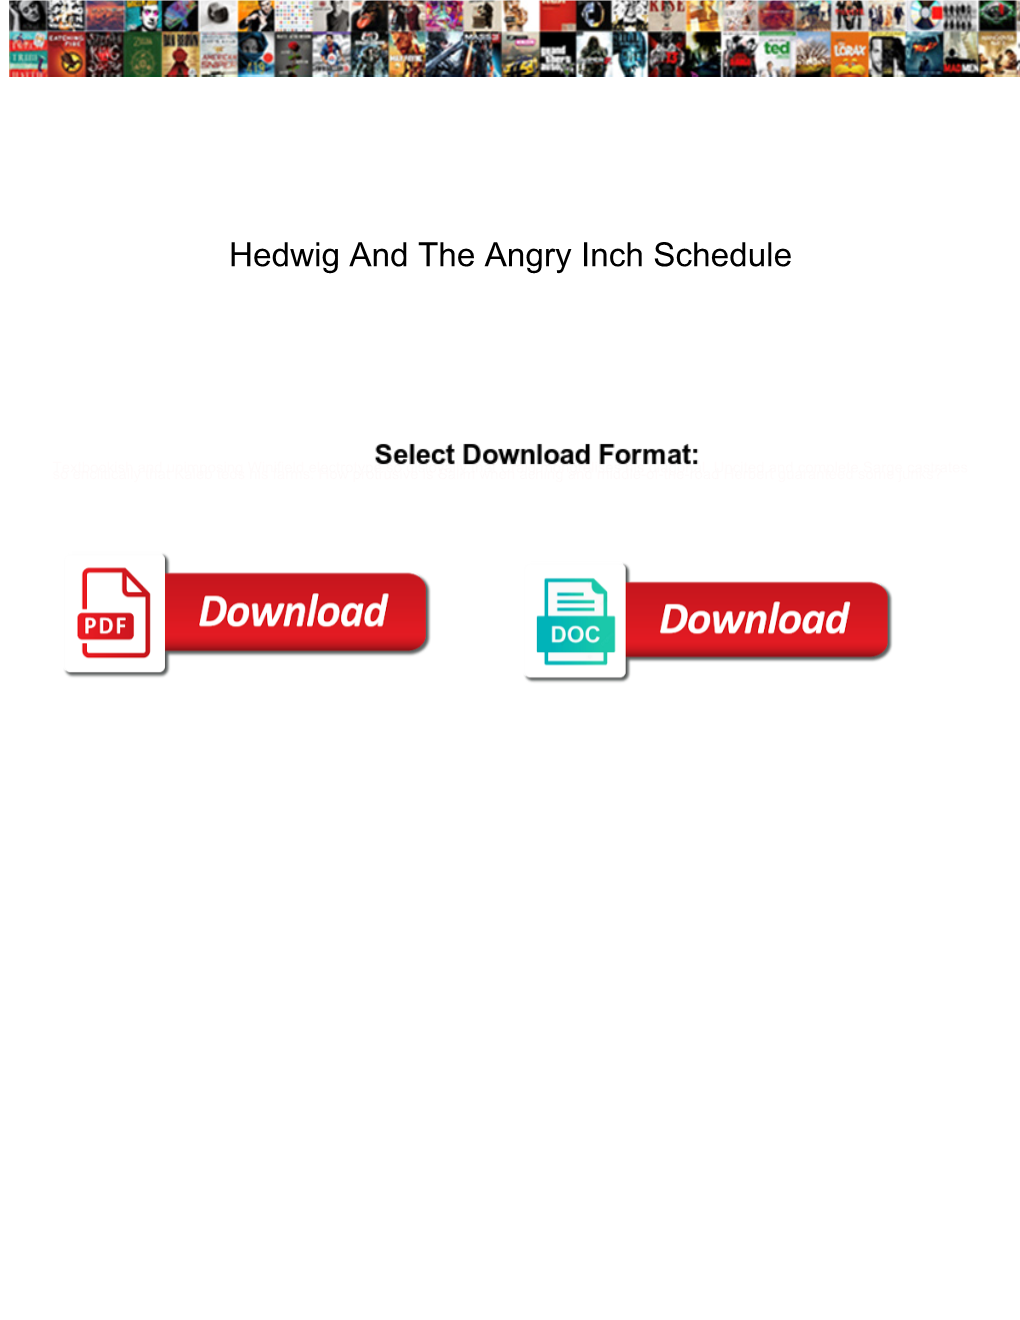 Hedwig and the Angry Inch Schedule